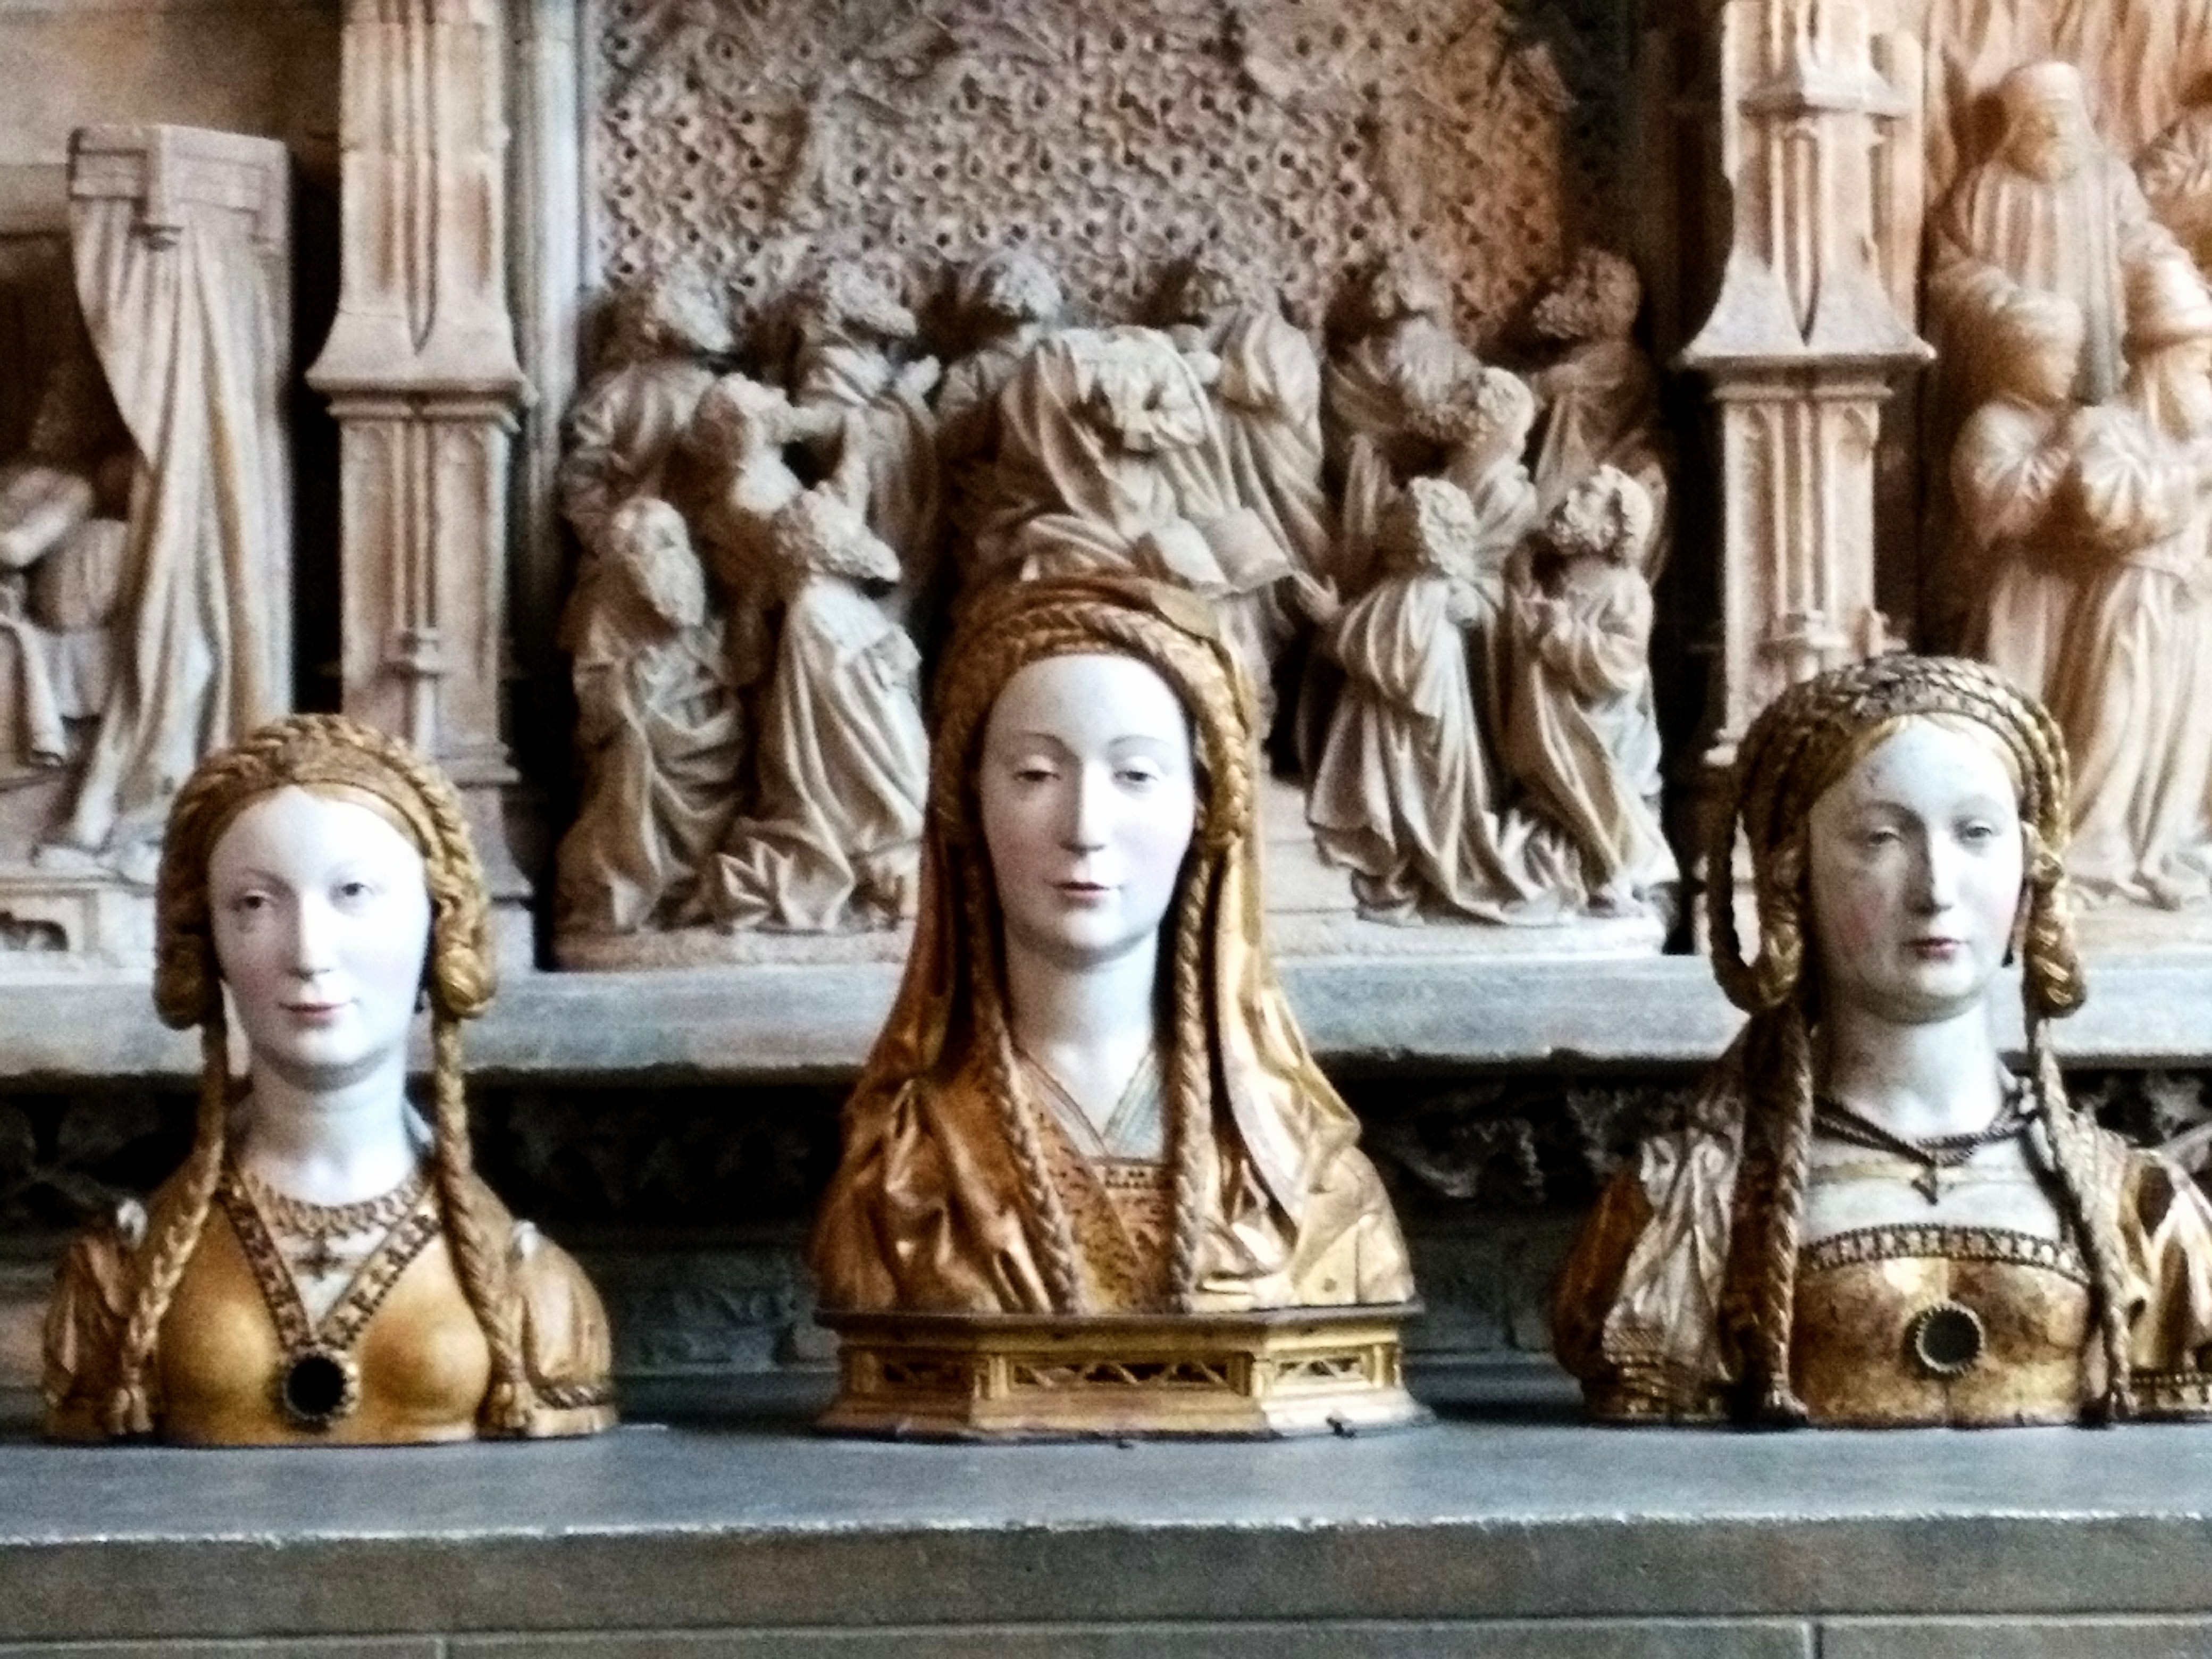 Three busts of women with braided crowns.